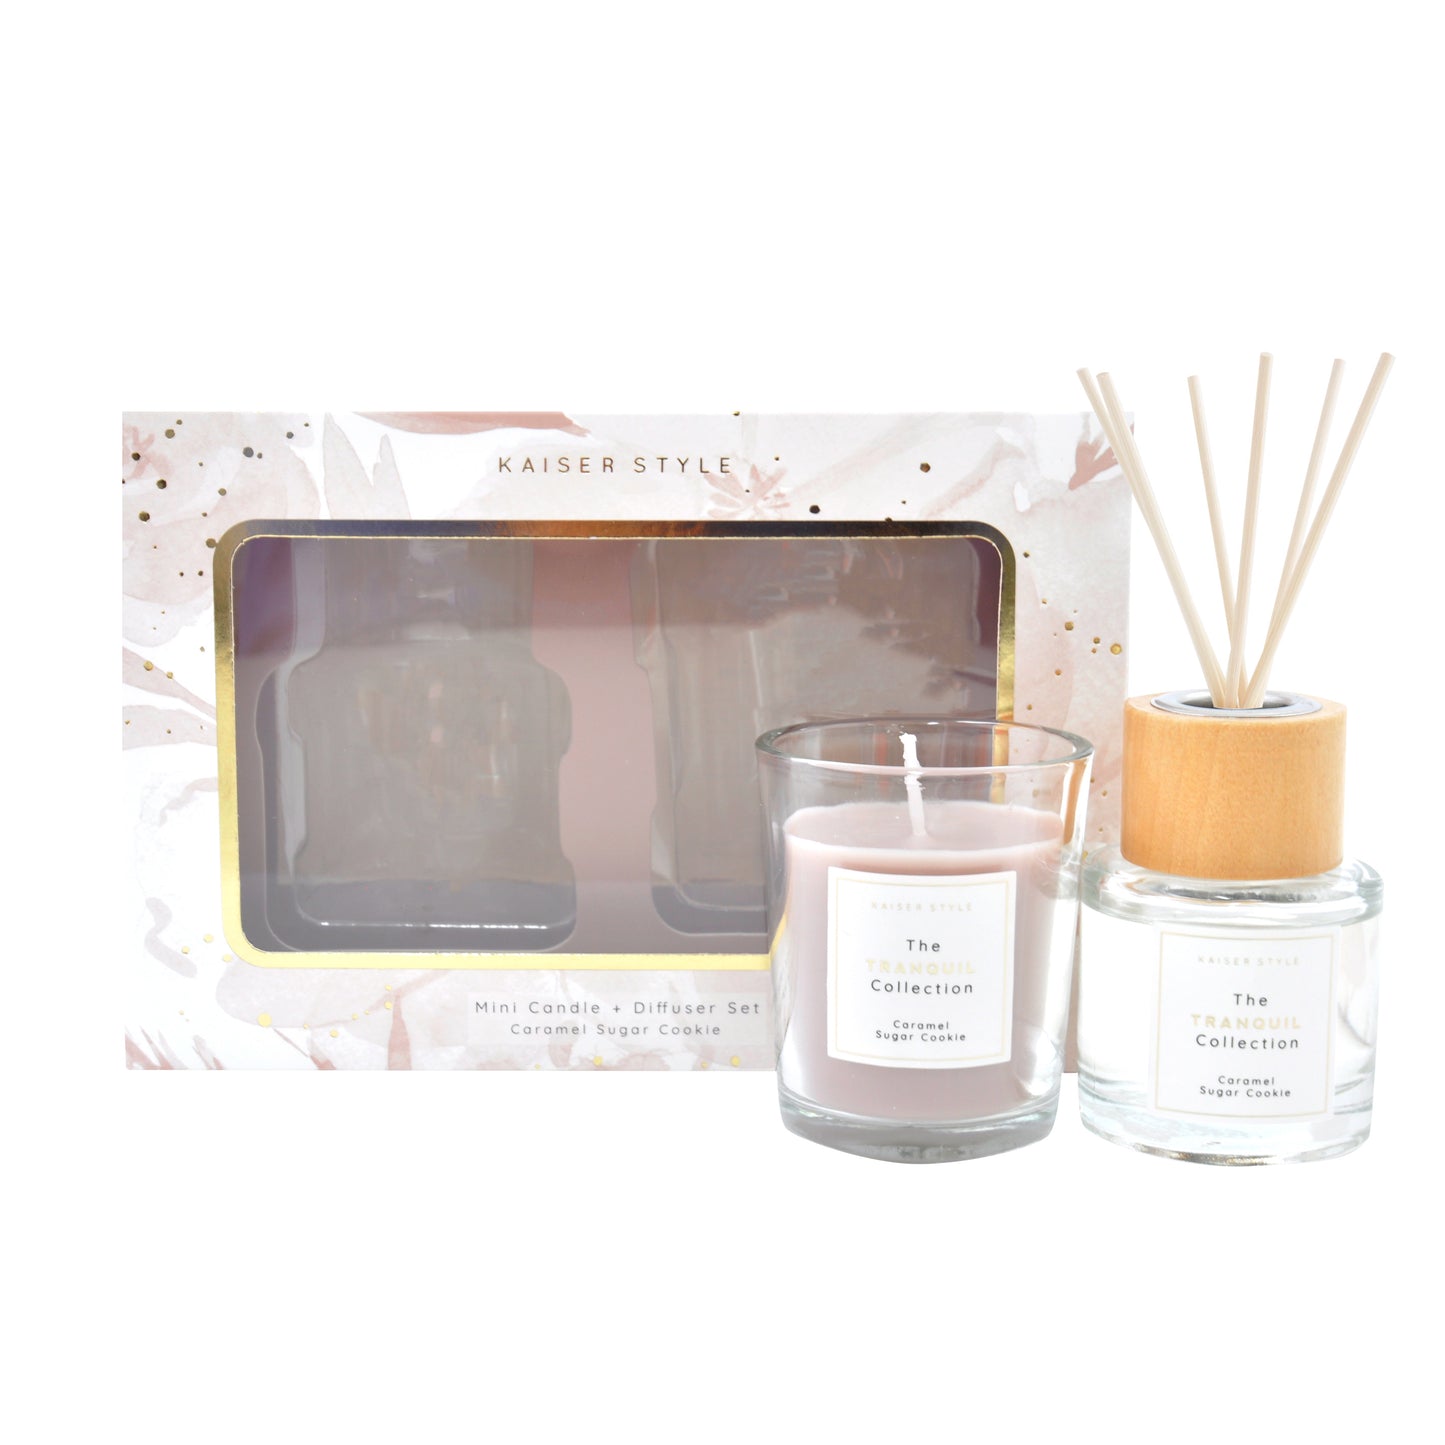 Tranquil Candle & Diffuser Set - CARAMEL SUGAR COOKIE